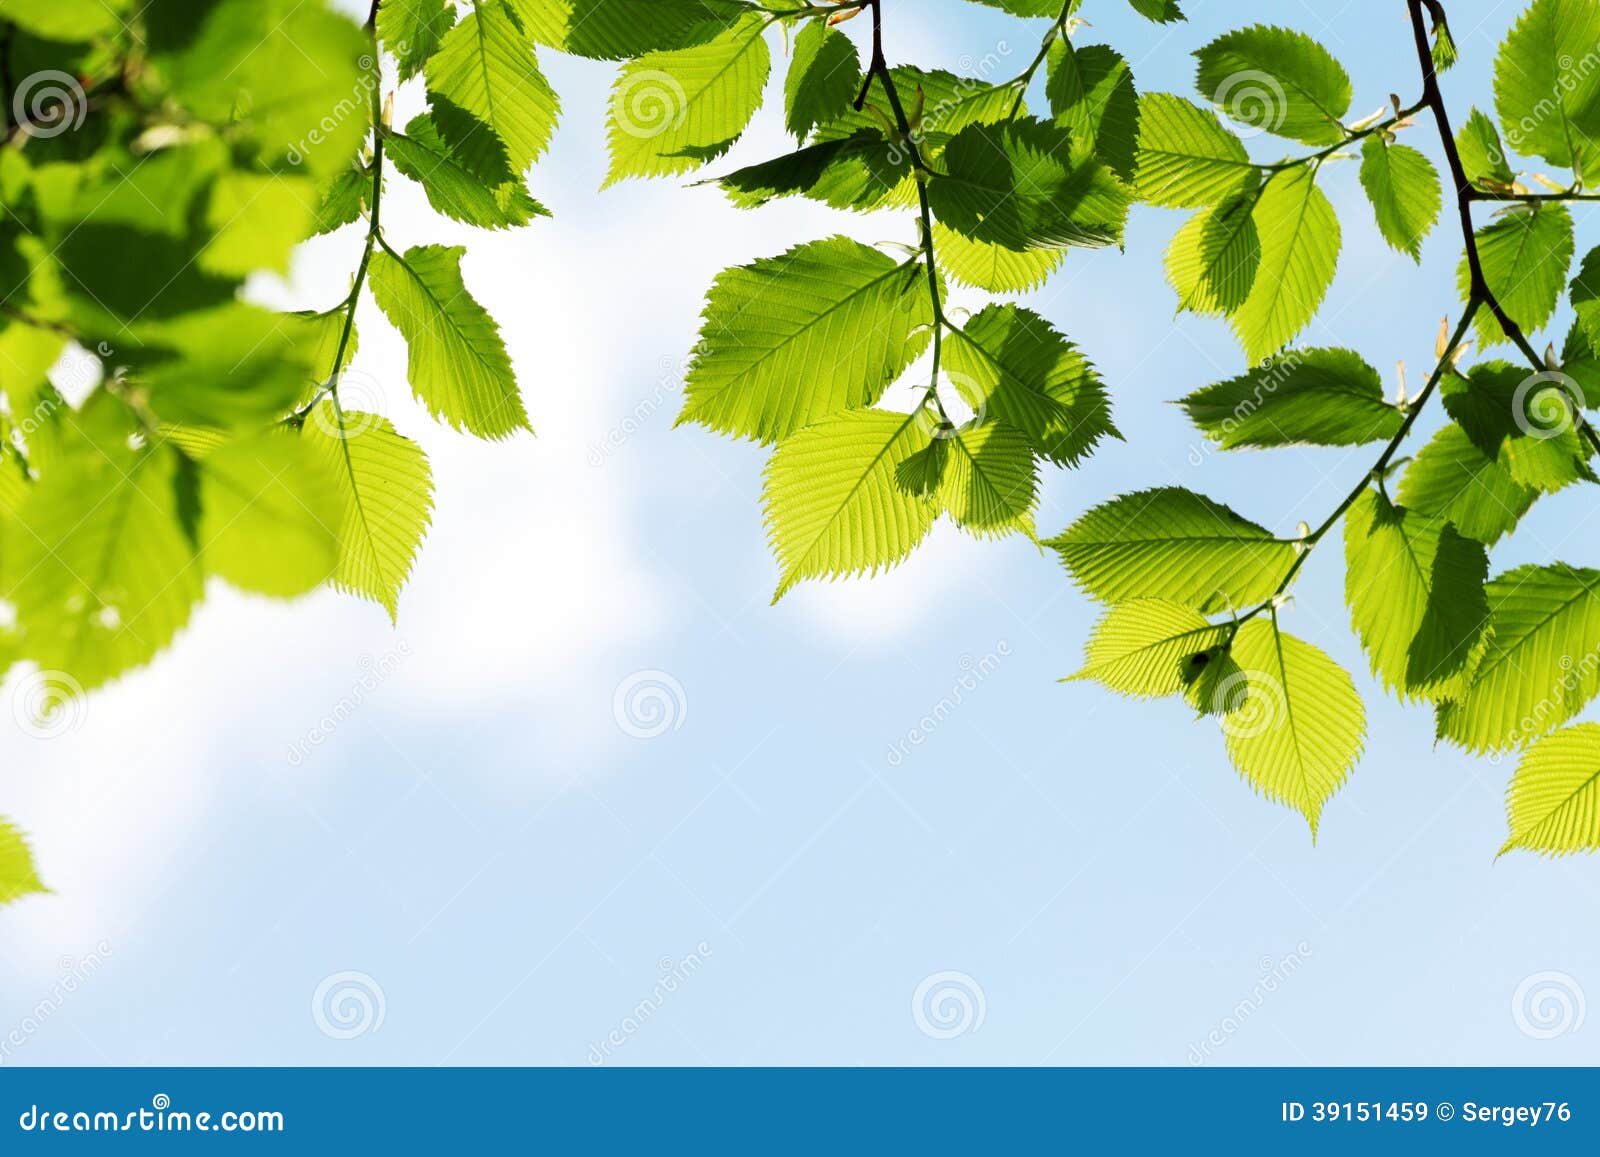 Leaves On Blue Sky Background Royalty Free Stock Photography